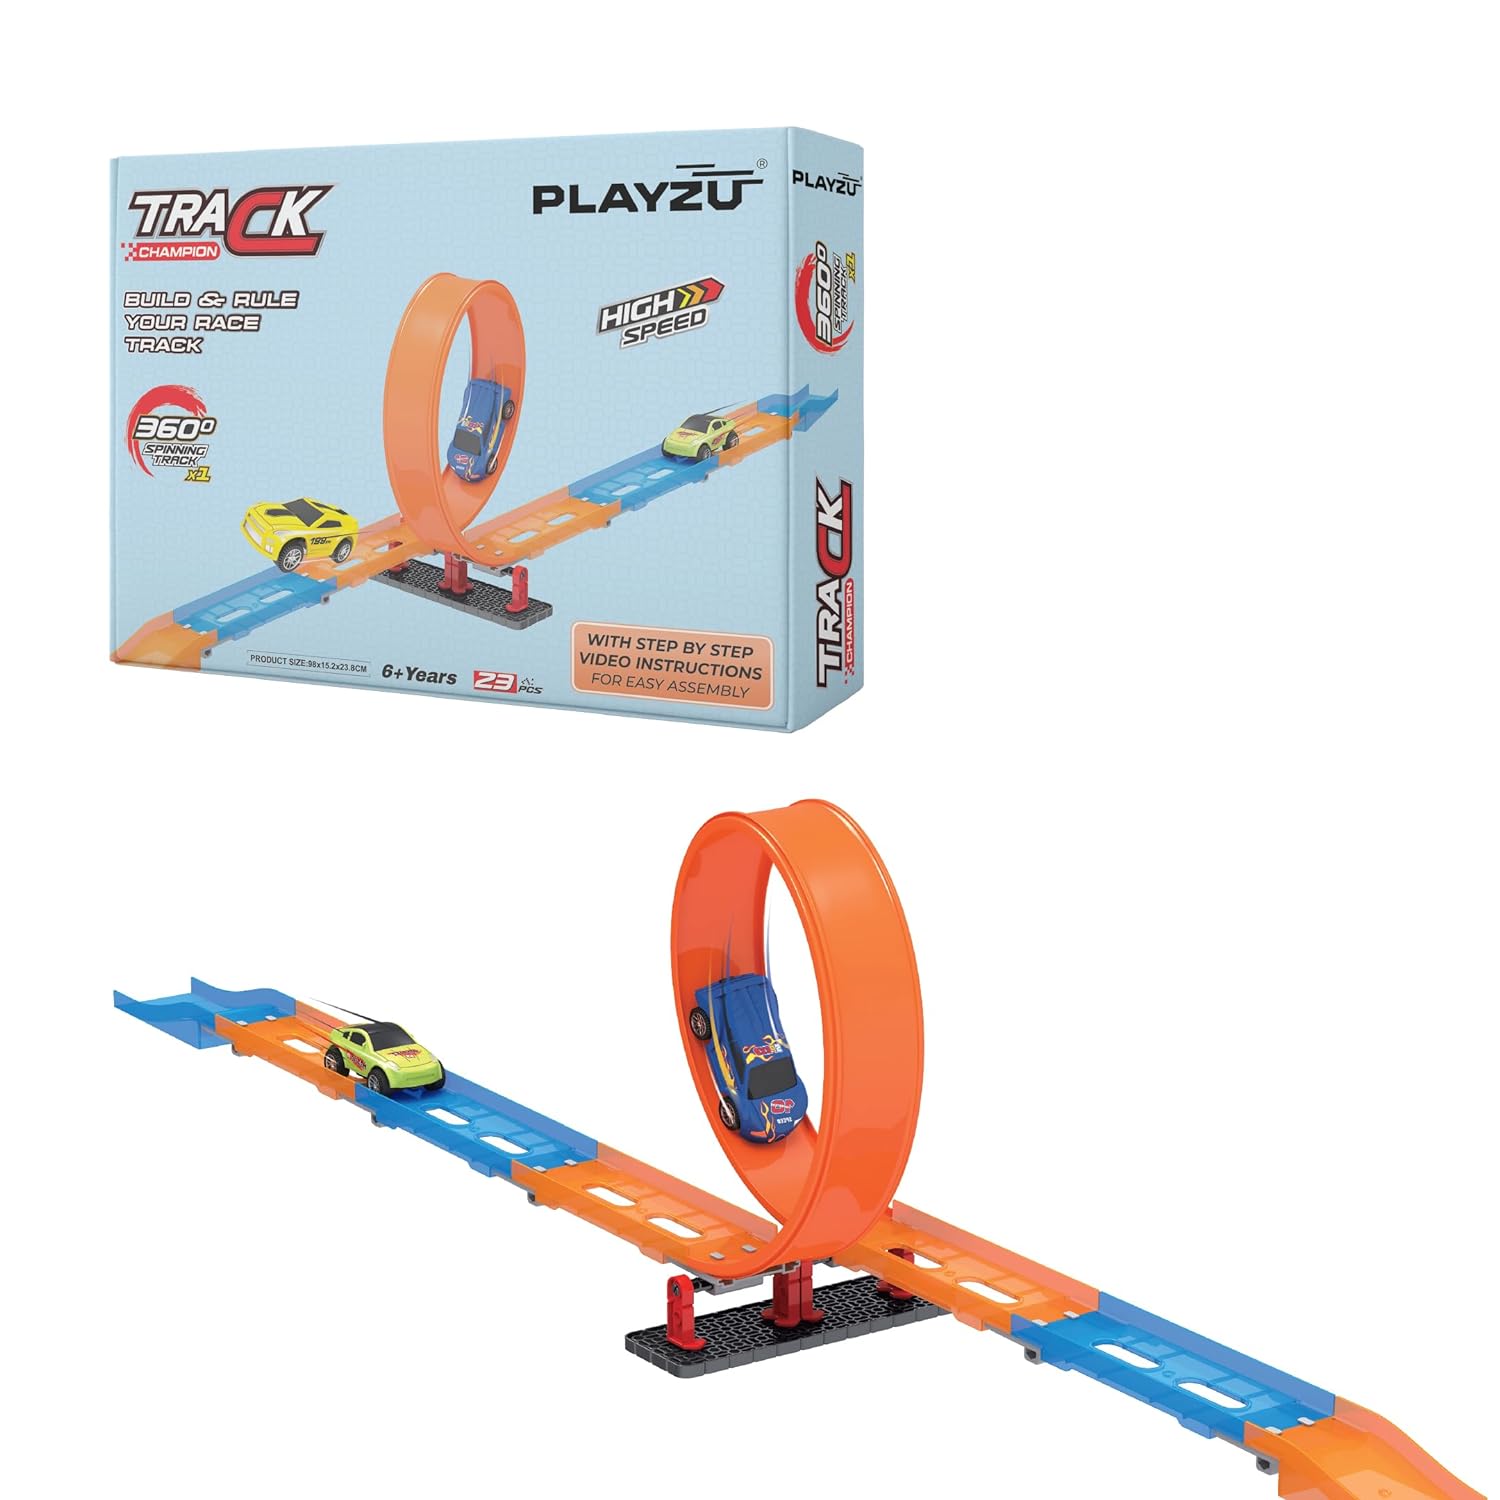 Playzu 23 pcs Single 360 Degree Loop Racing Track Game with Building Block Sets and One Strong 1:64 Scaled Pull Back Car and Track Easy to Assemble for Ages 6+